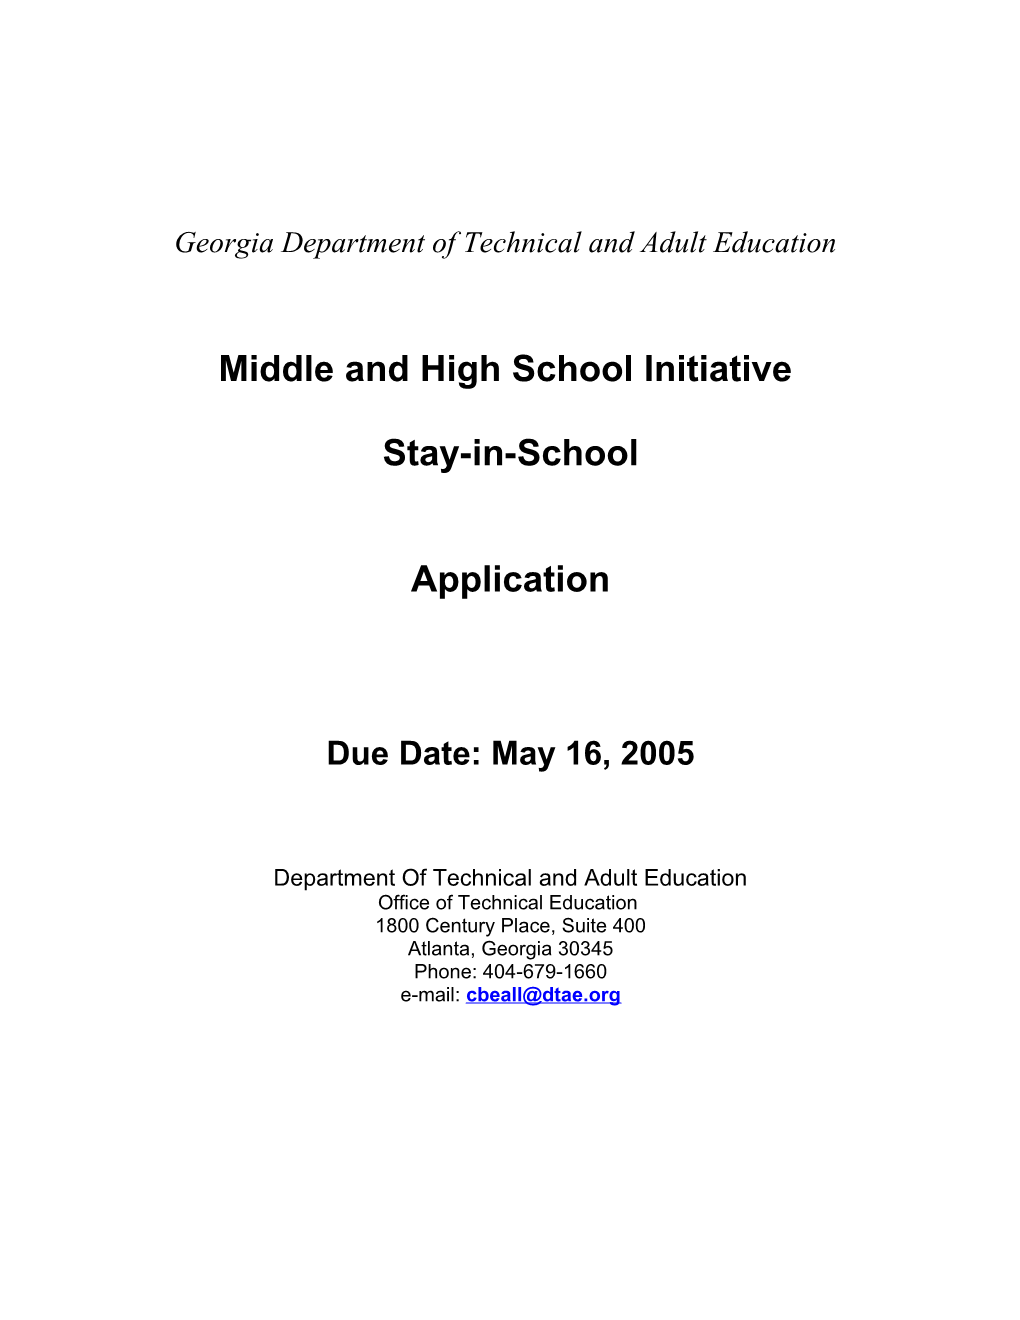 Middle and High School Initiative Drop-Out Prevention Grant Program